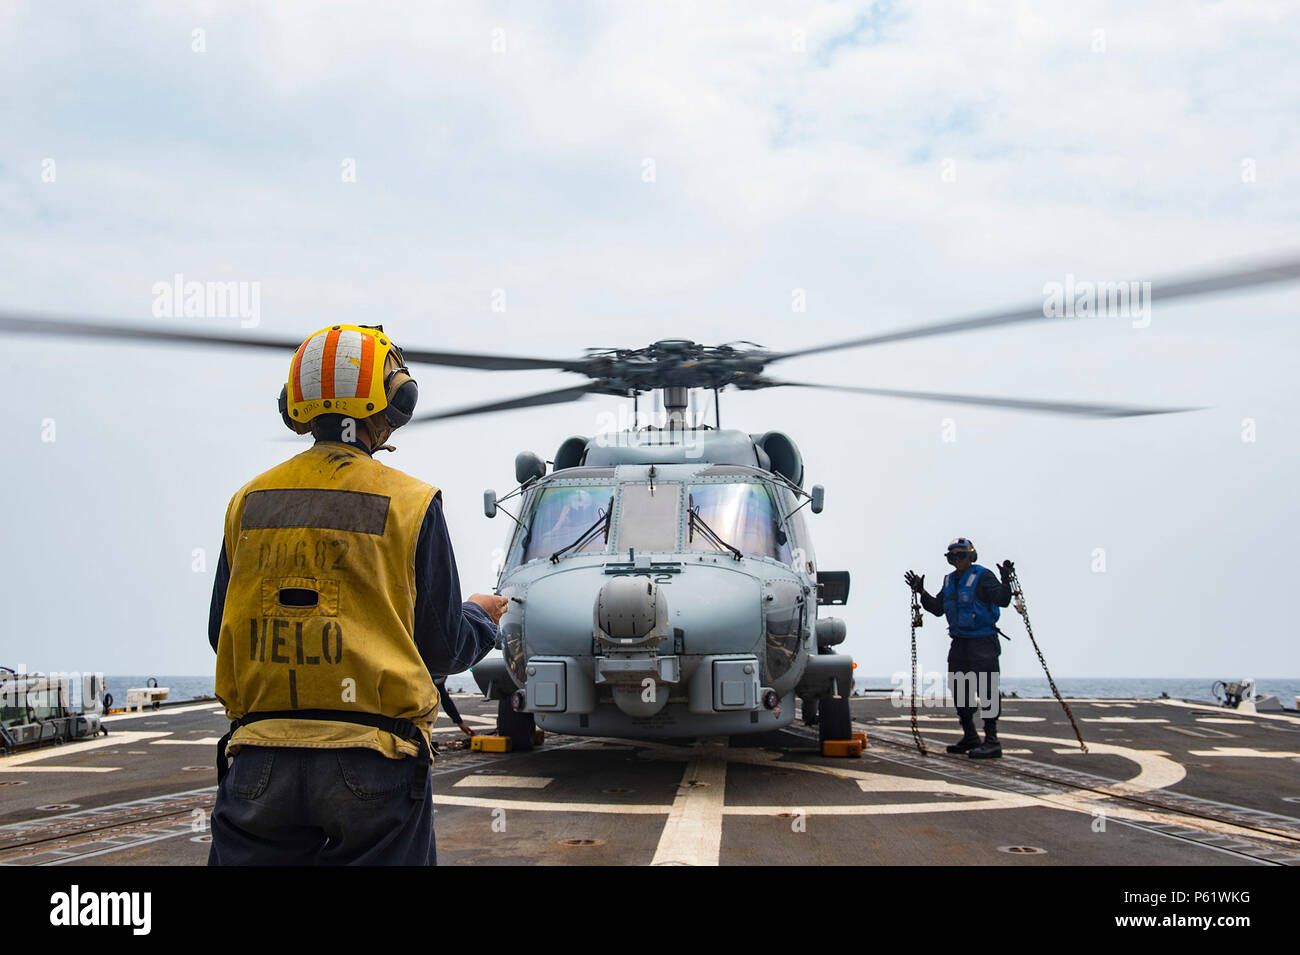 160406-N-MD297-051 PACIFIC OCEAN (April 6, 2016) - Boatswain's Mate 3rd Class Terry Davis, right, gestures that the chains securing an MH-60R helicopter from the 'Jaguars' of Helicopter Maritime Strike Squadron (HSM) 60 have been removed as the helicopter prepares to take off the flight deck aboard the Arleigh Burke-class guided-missile destroyer USS Lassen (DDG 82). Lassen is currently underway in support of Operation Martillo, a joint operation with the U.S. Coast Guard and partner nations within the 4th Fleet area of responsibility. Operation Martillo is being led by Joint Interagency Task  Stock Photo